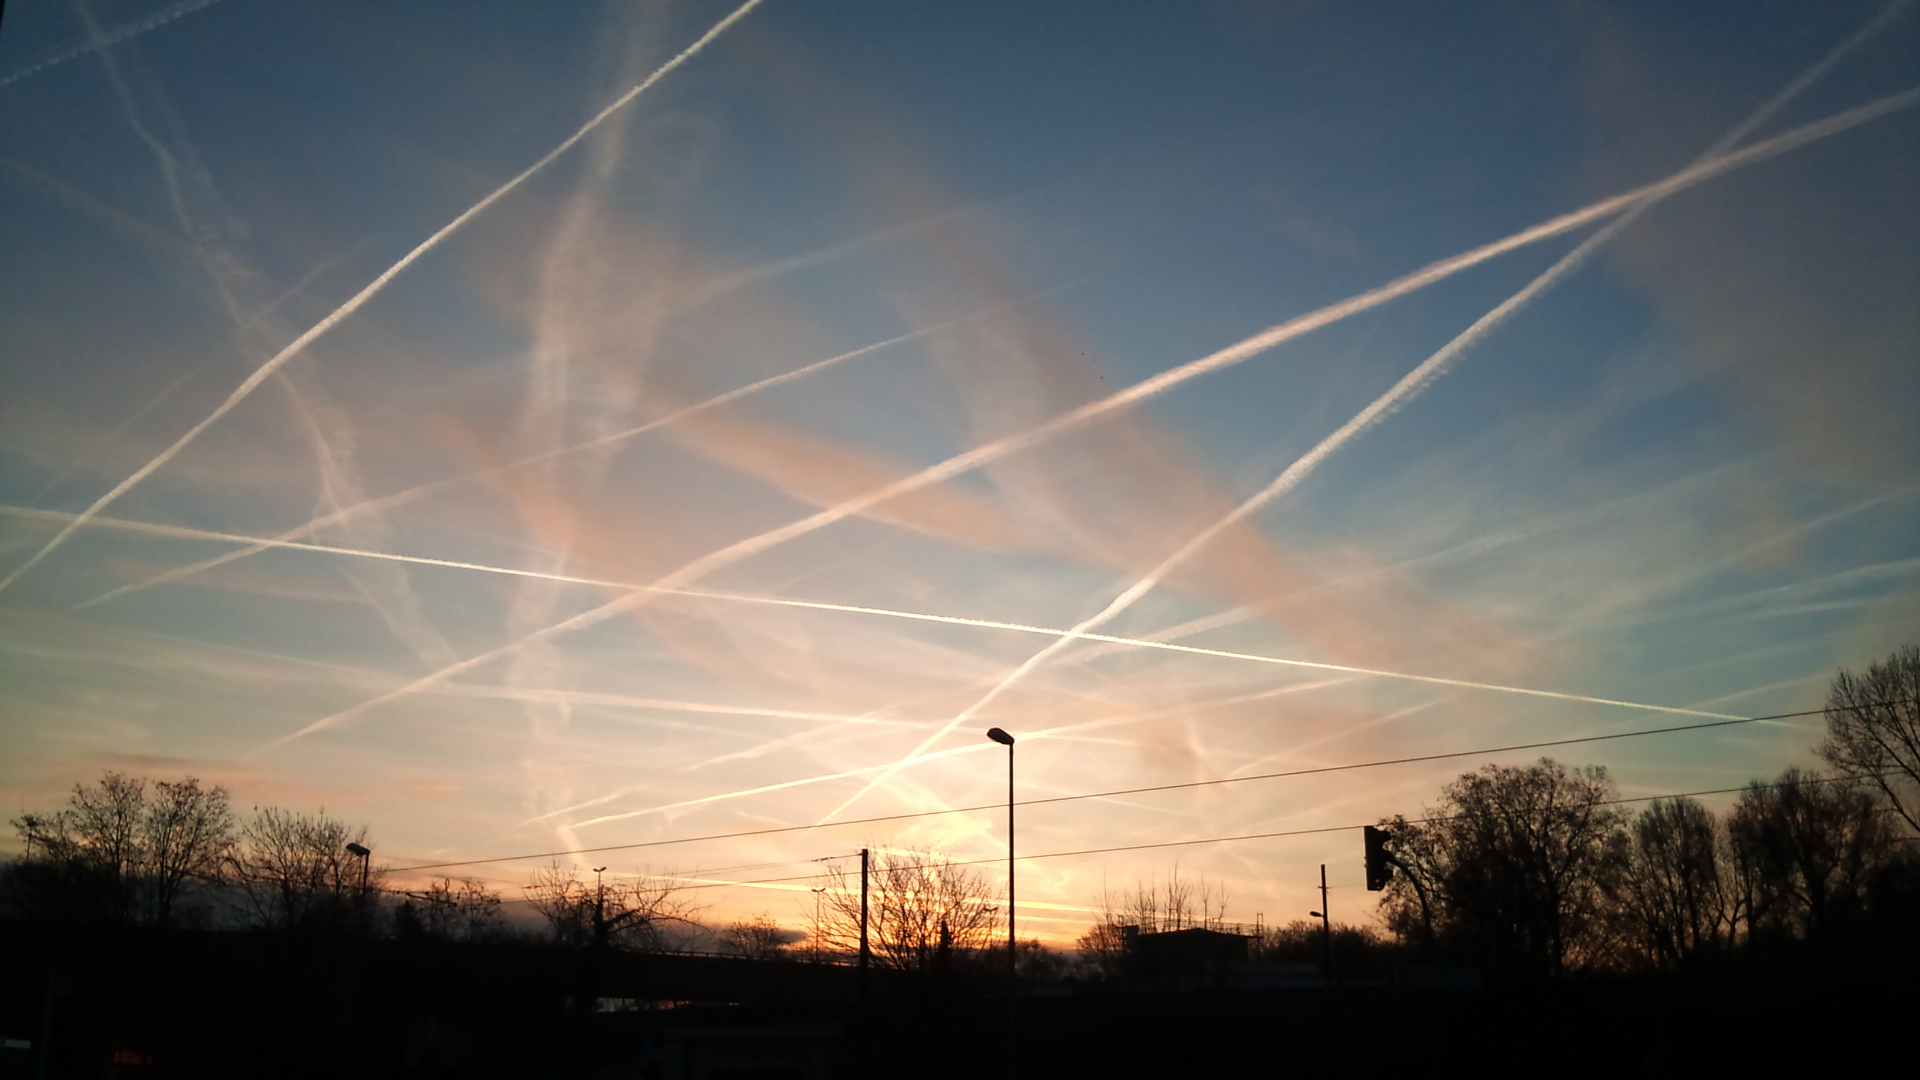 Chemtrail conspiracies have become reality, as corporate media sells geoengineering as the solution for climate change  